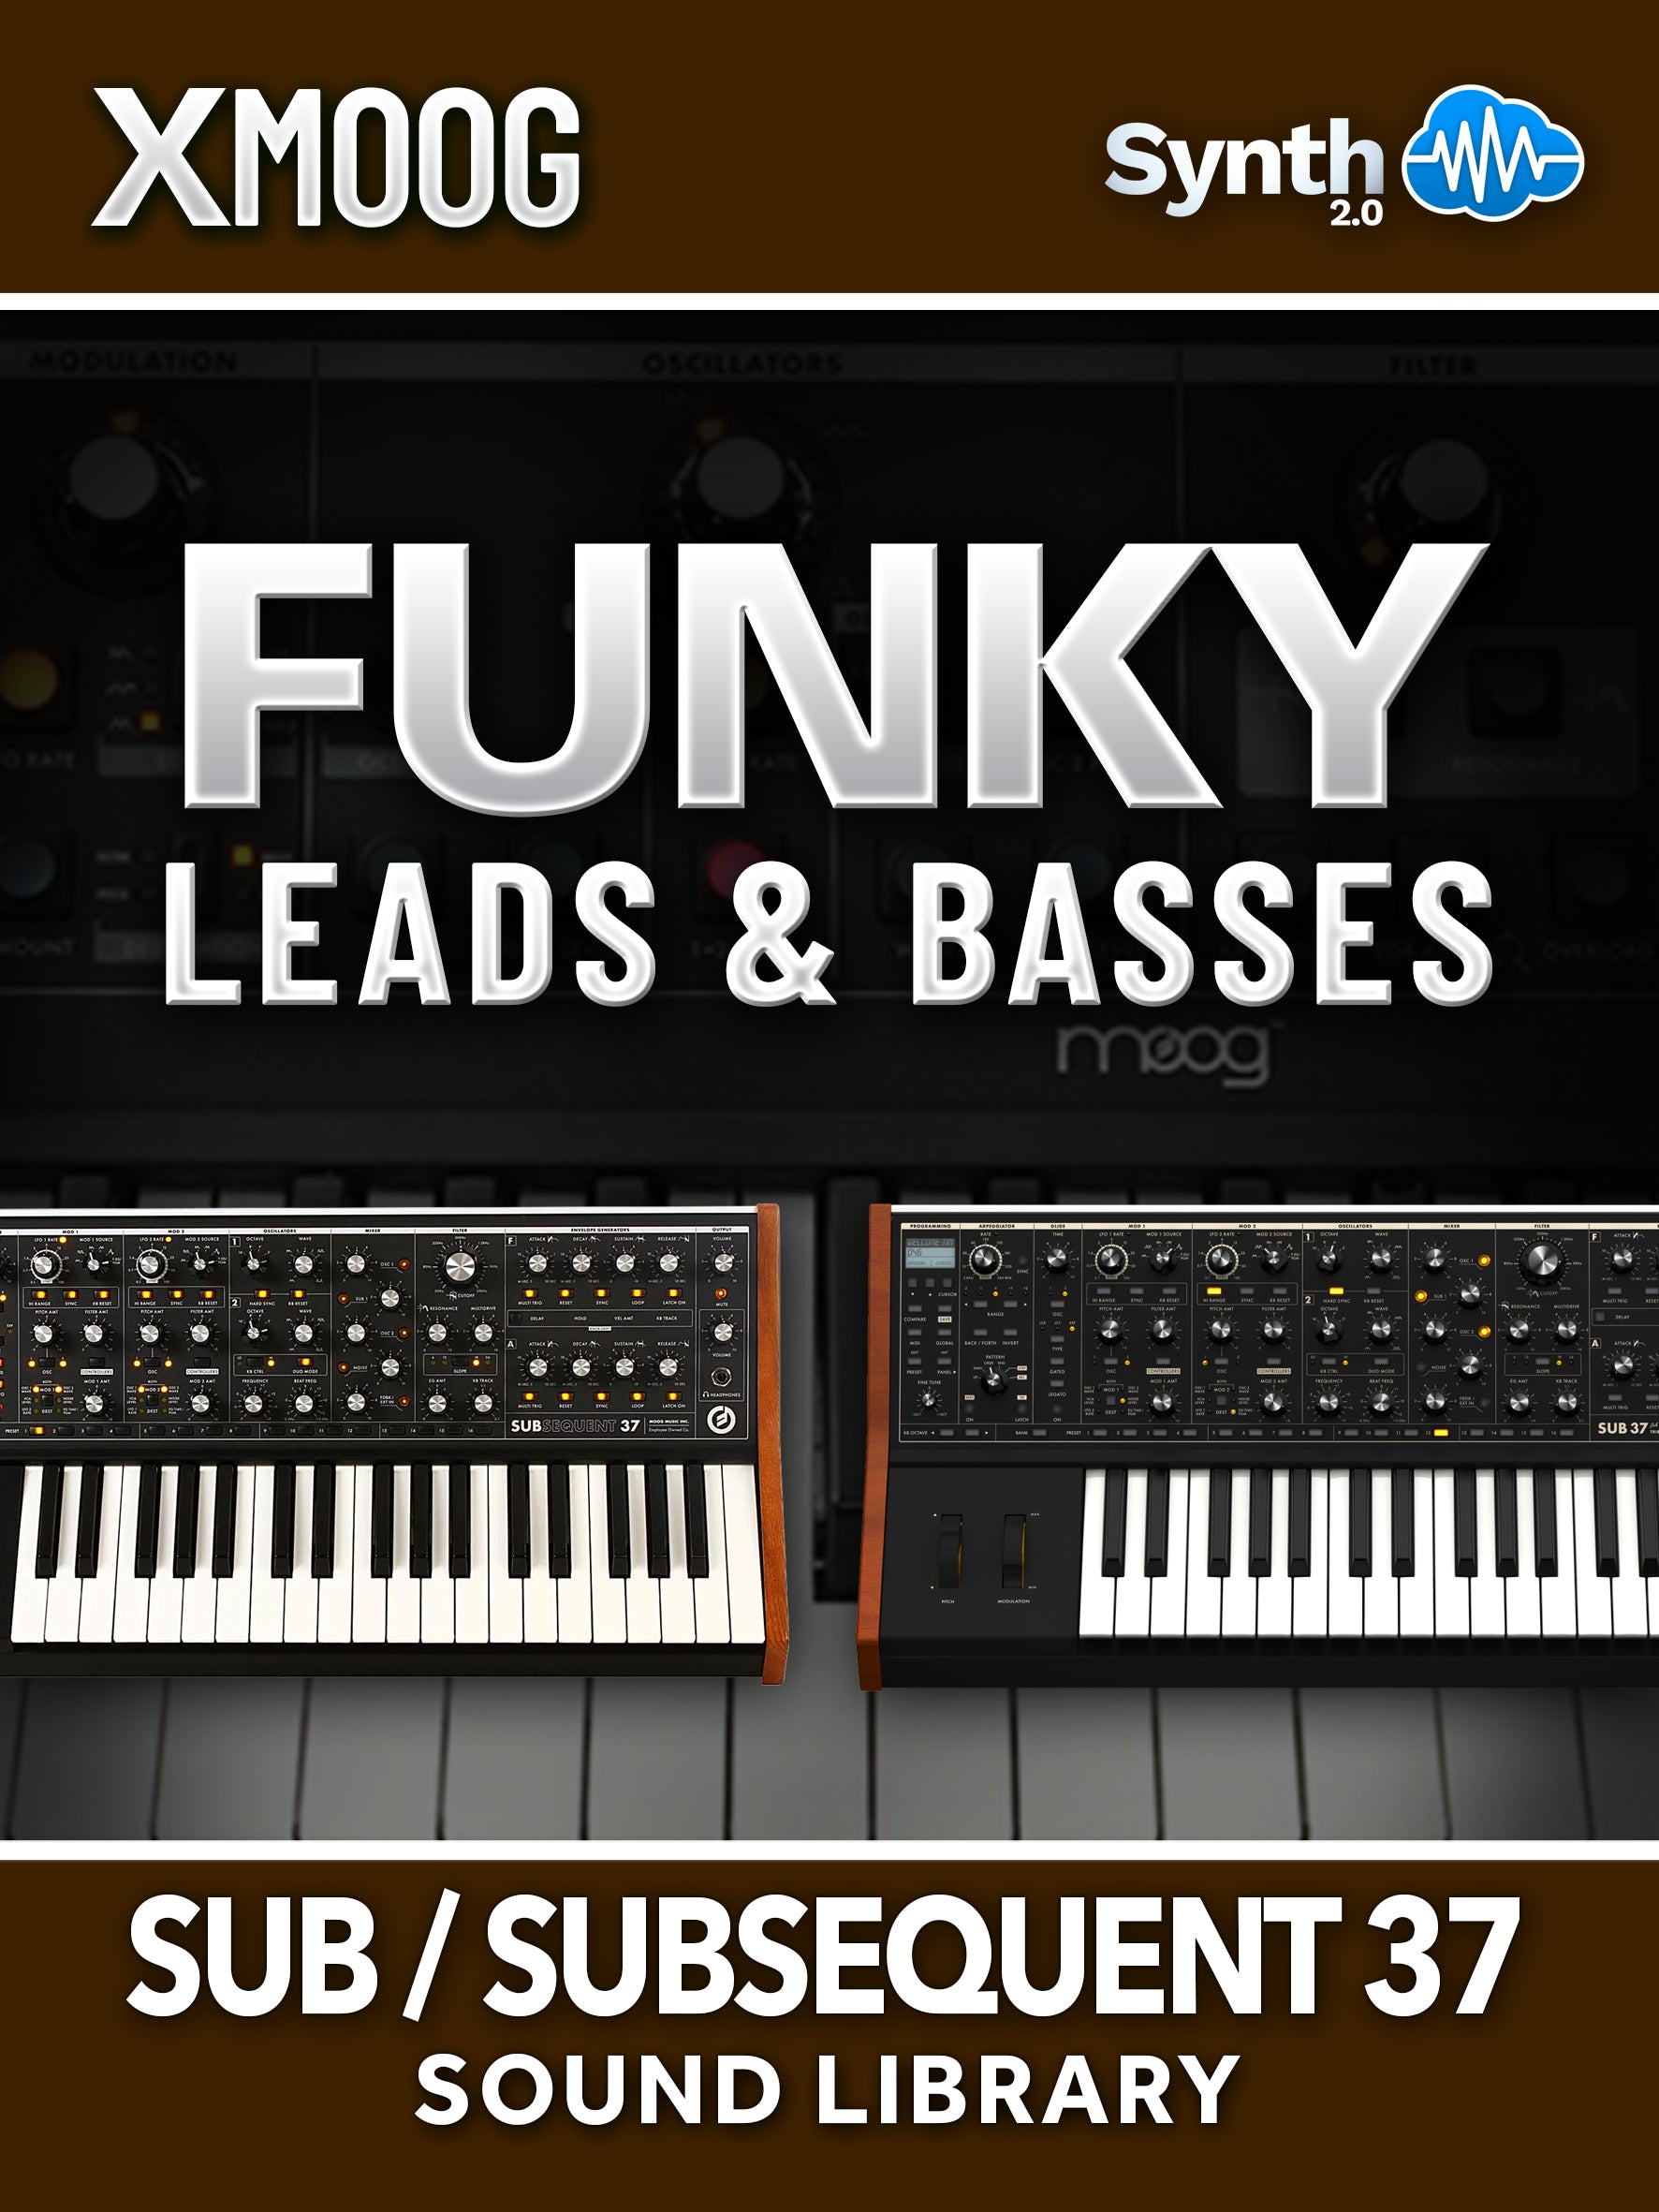 APL015 - Funky Leads & Basses - Moog Sub 37 / Subsequent 37 ( 62 presets )